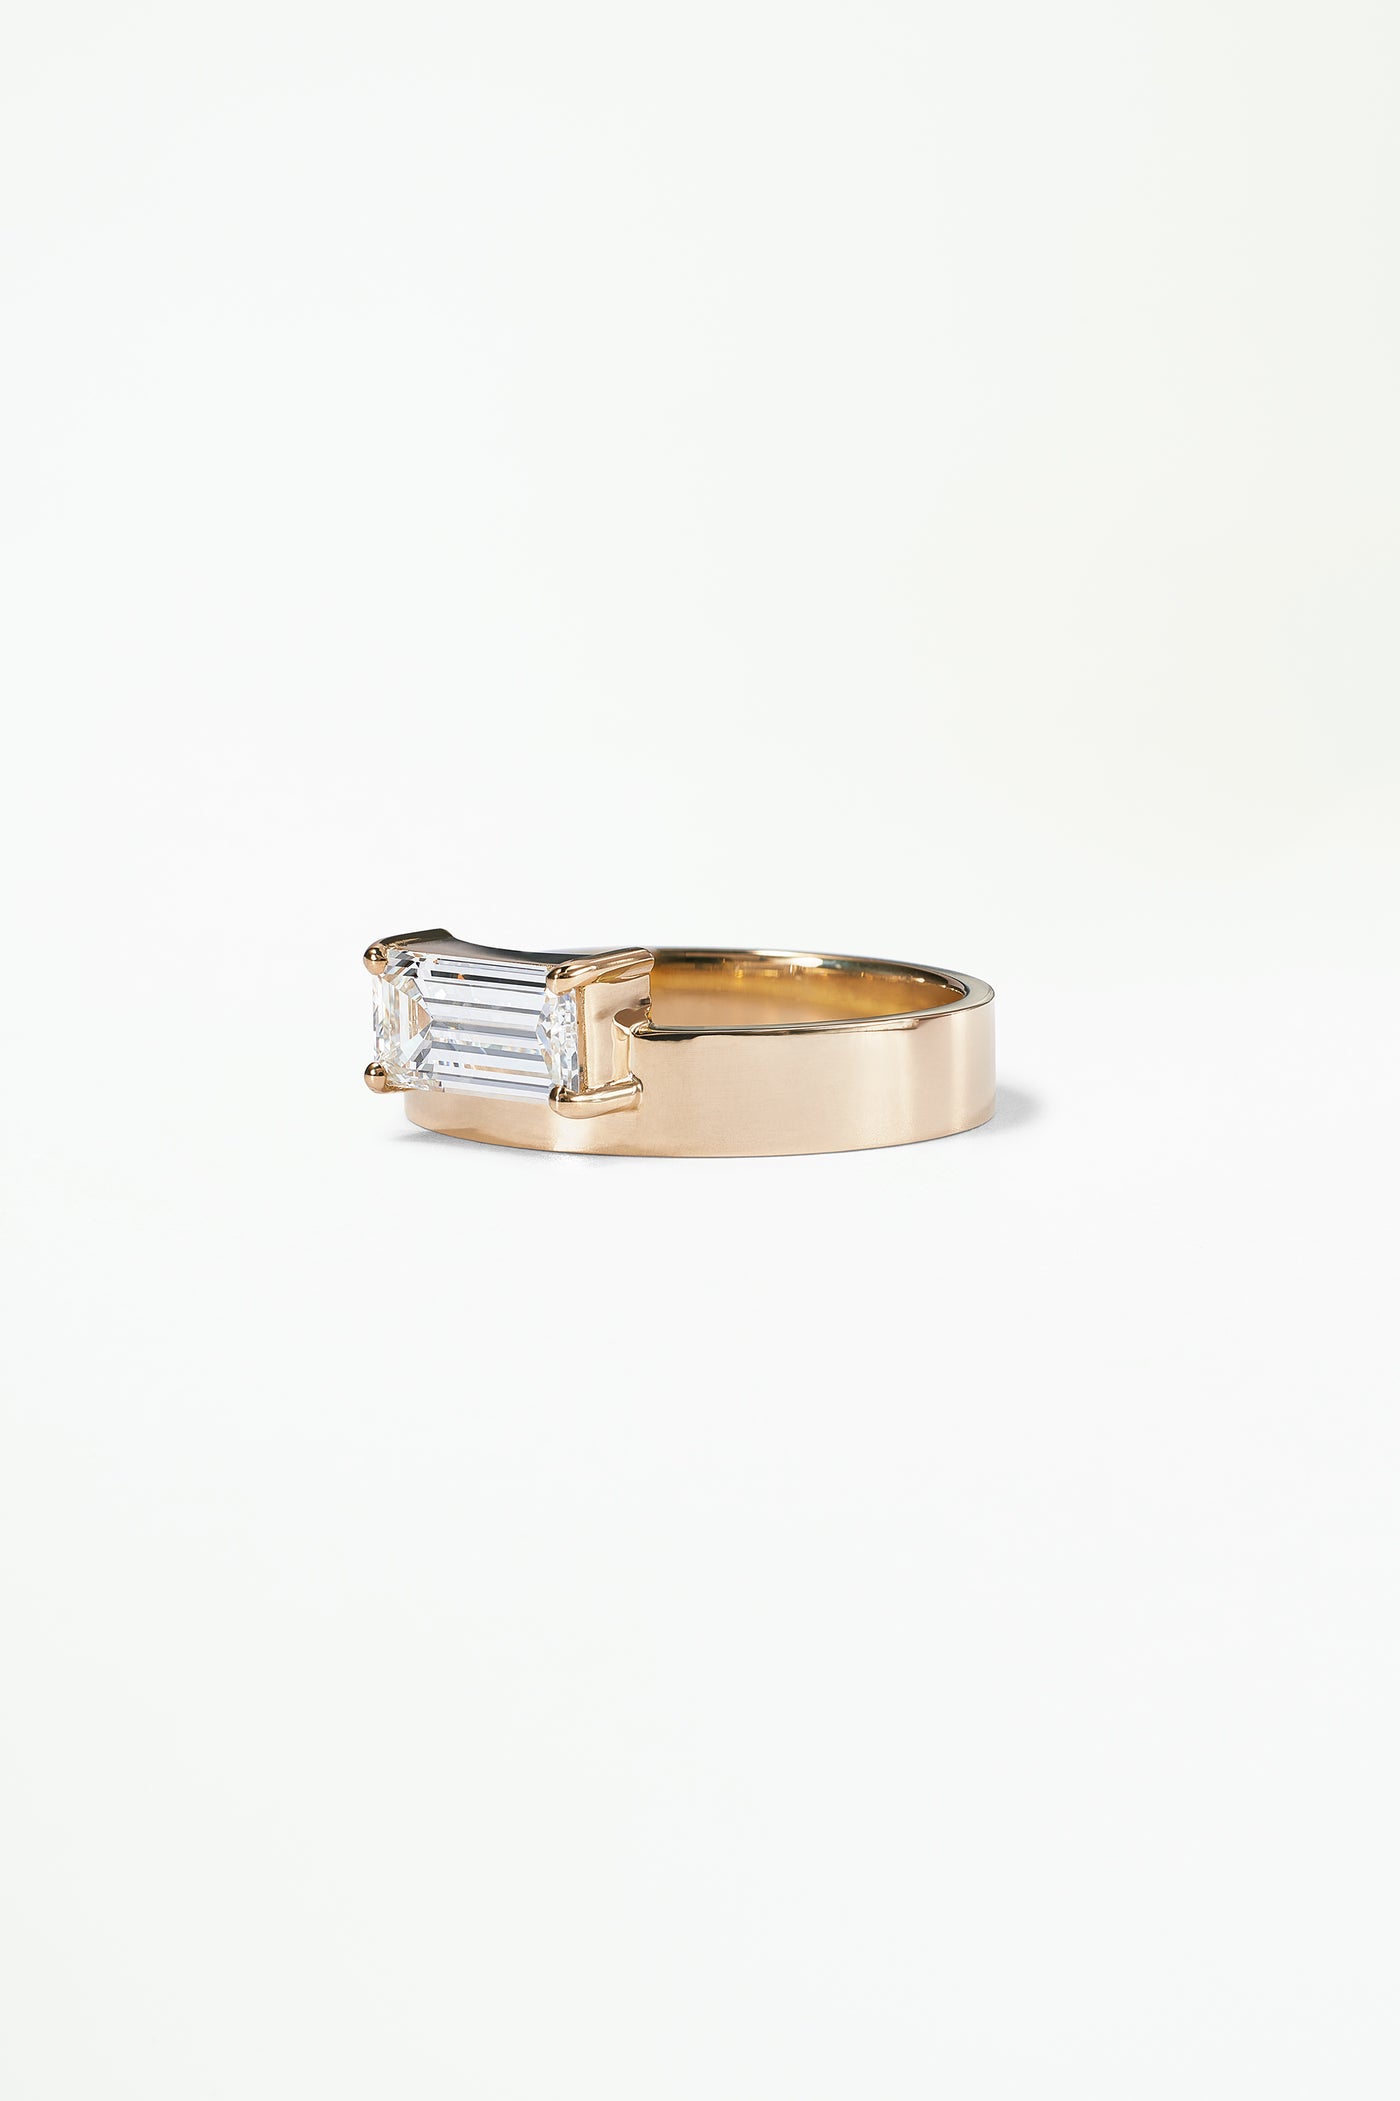 One of a Kind Emerald Cut Diamond Monolith Ring No. 24